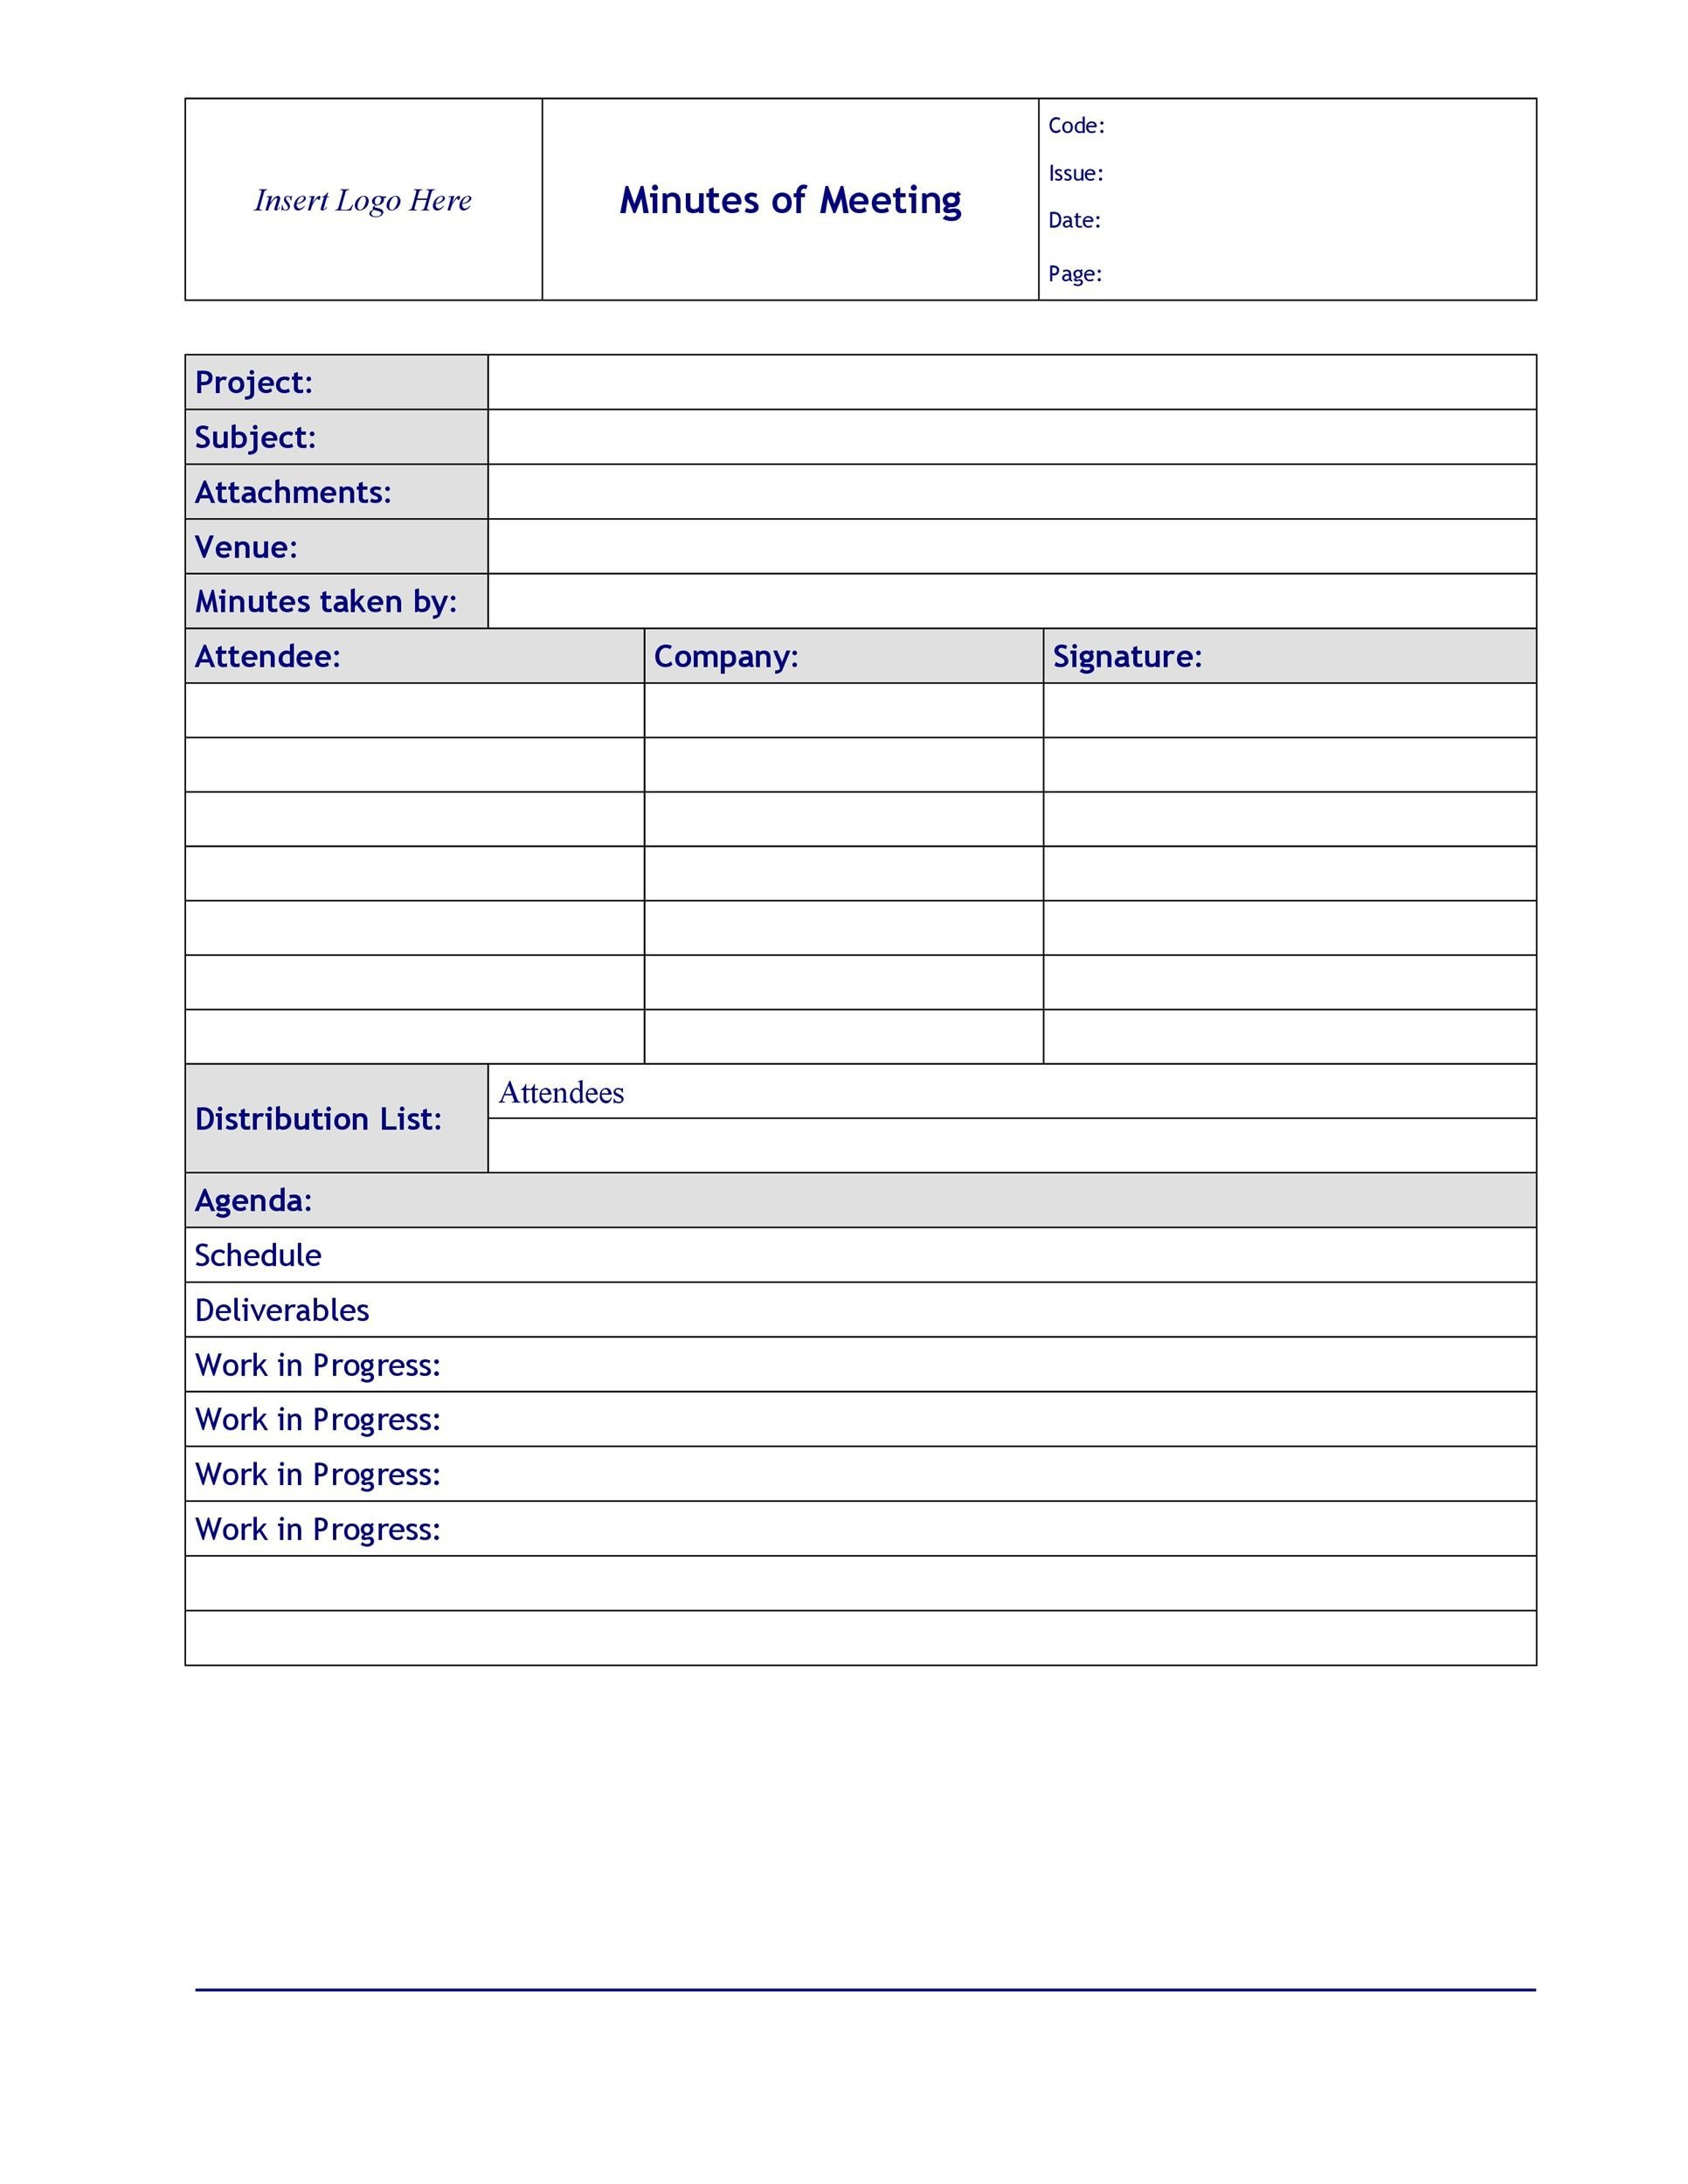 Meeting Minutes Template Uk - Crafts DIY and Ideas Blog Intended For Minute Meeting Template Free